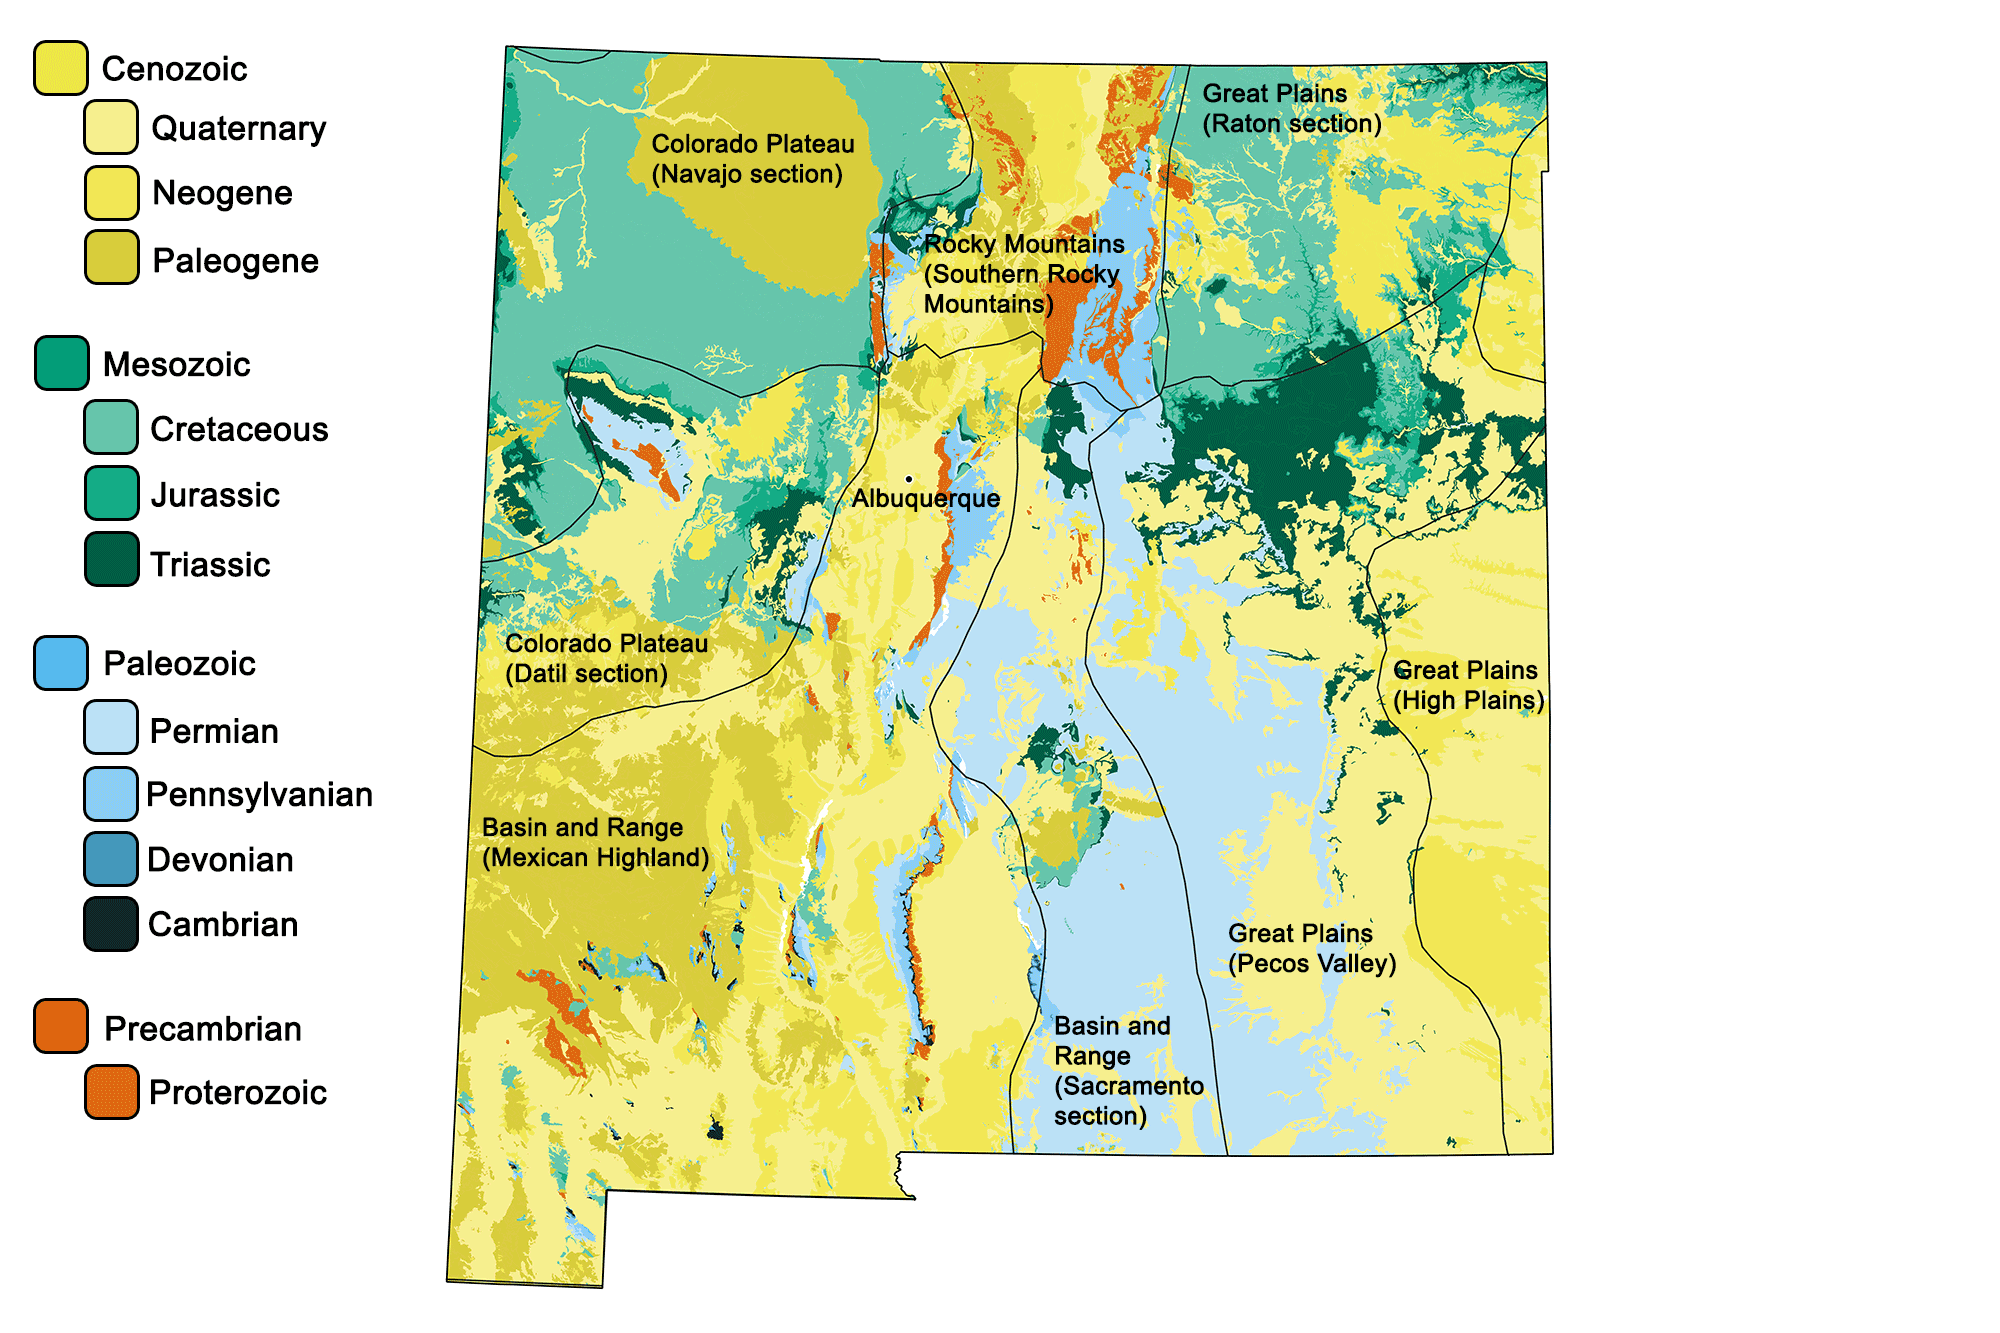 Geologic map of New Mexico.